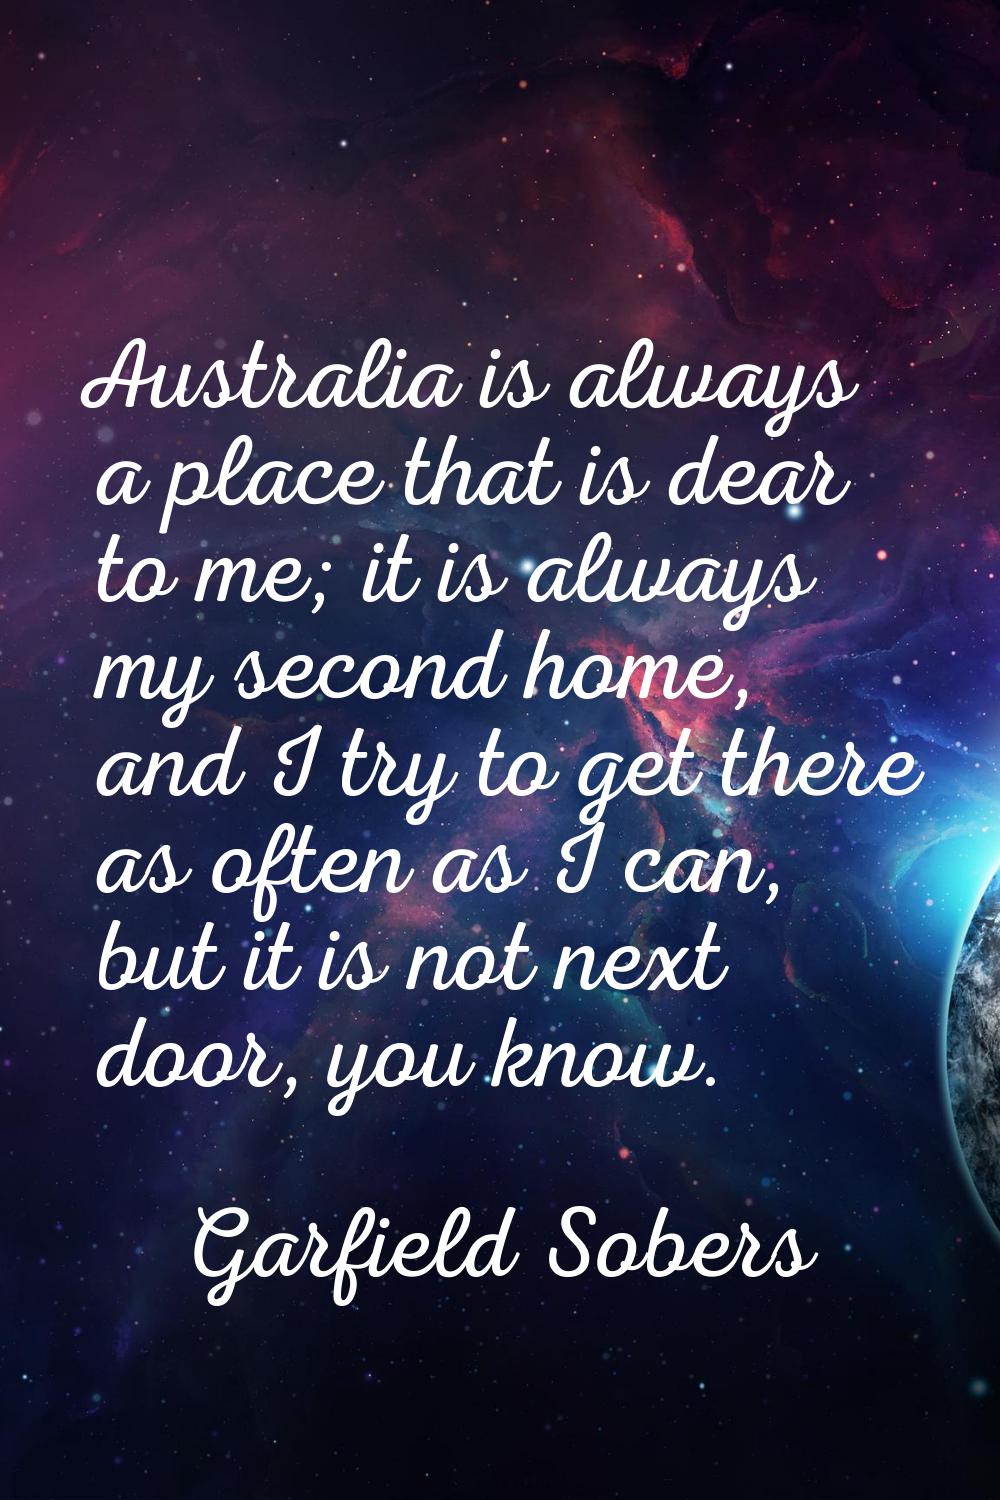 Australia is always a place that is dear to me; it is always my second home, and I try to get there